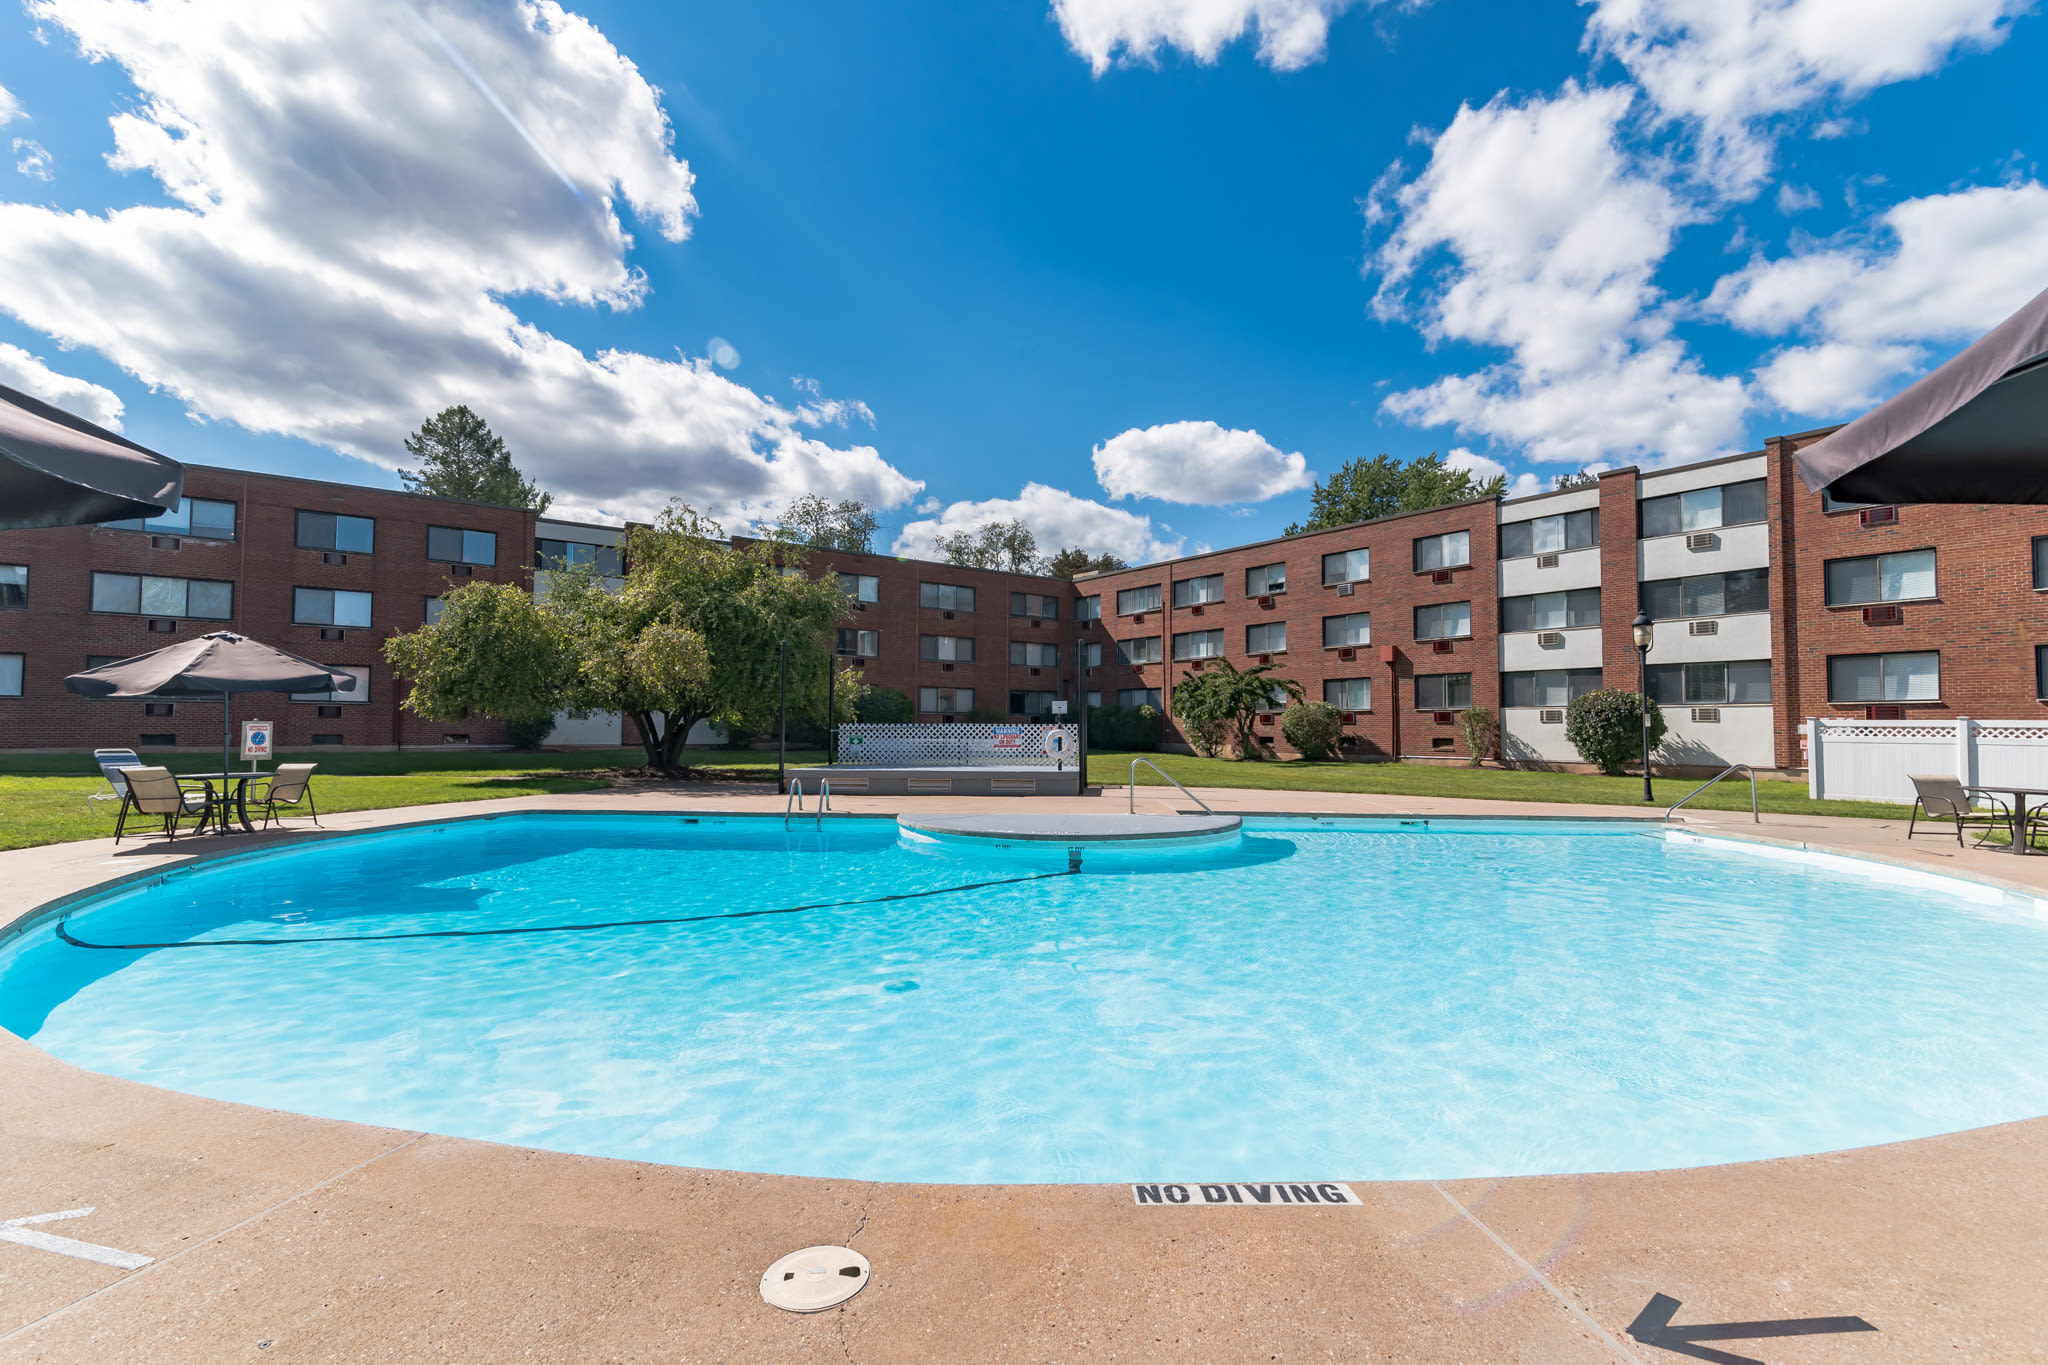 Pool center view at Eagle Rock Apartments at West Hartford in West Hartford, Connecticut